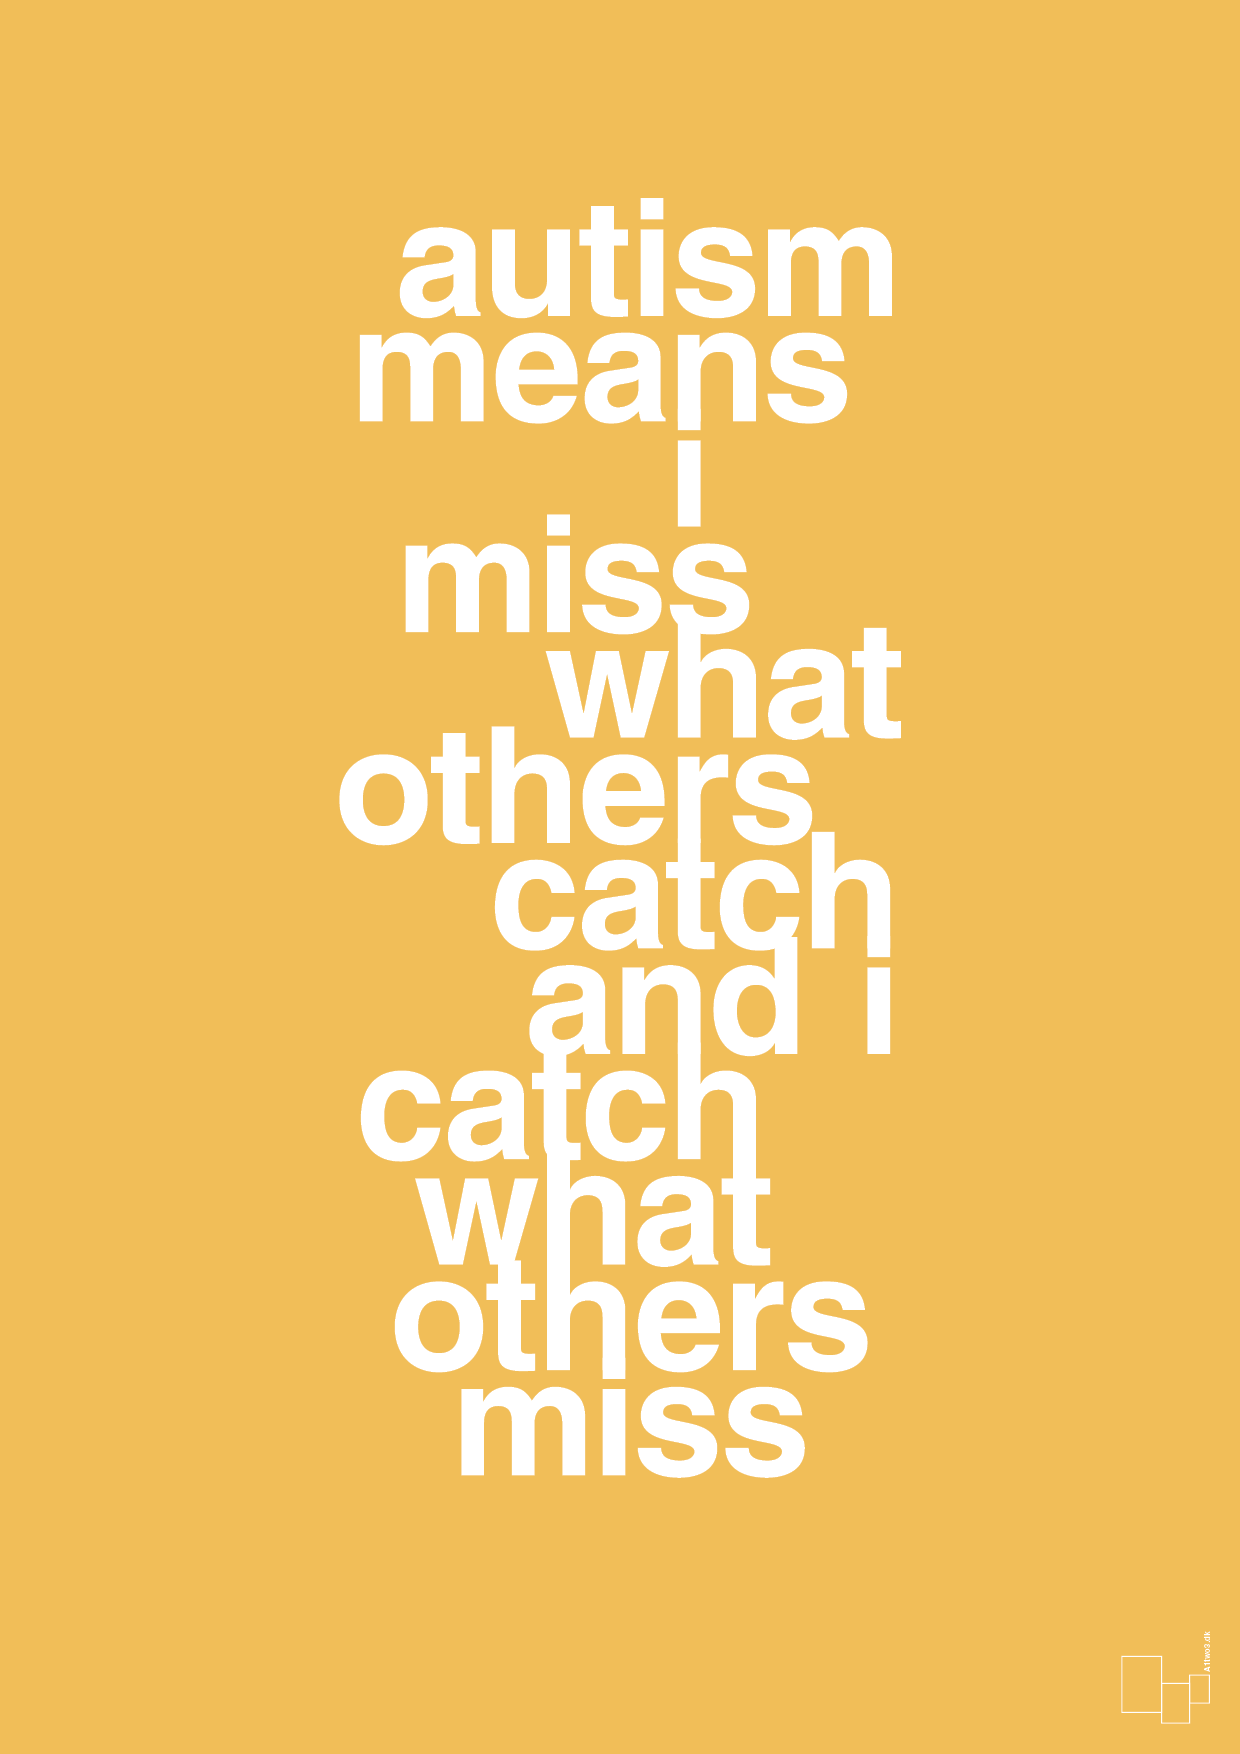 autism means i miss what others catch and i catch what others miss - Plakat med Samfund i Honeycomb